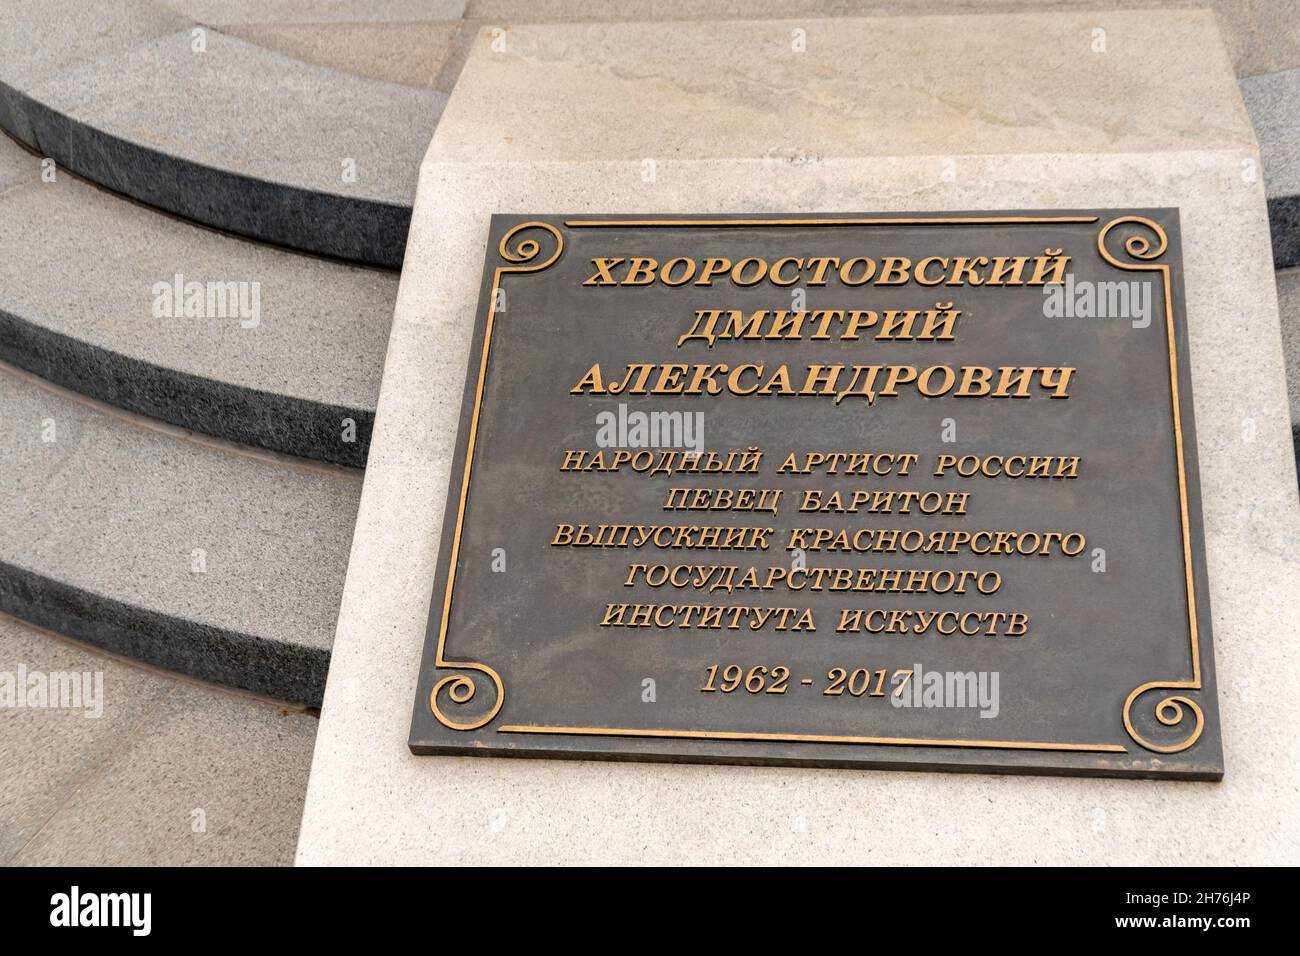 A memorial plaque at the monument to opera singer Dmitry Hvorostovsky that he graduated from the Krasnoyarsk Institute of Arts in Russian. Stock Photo